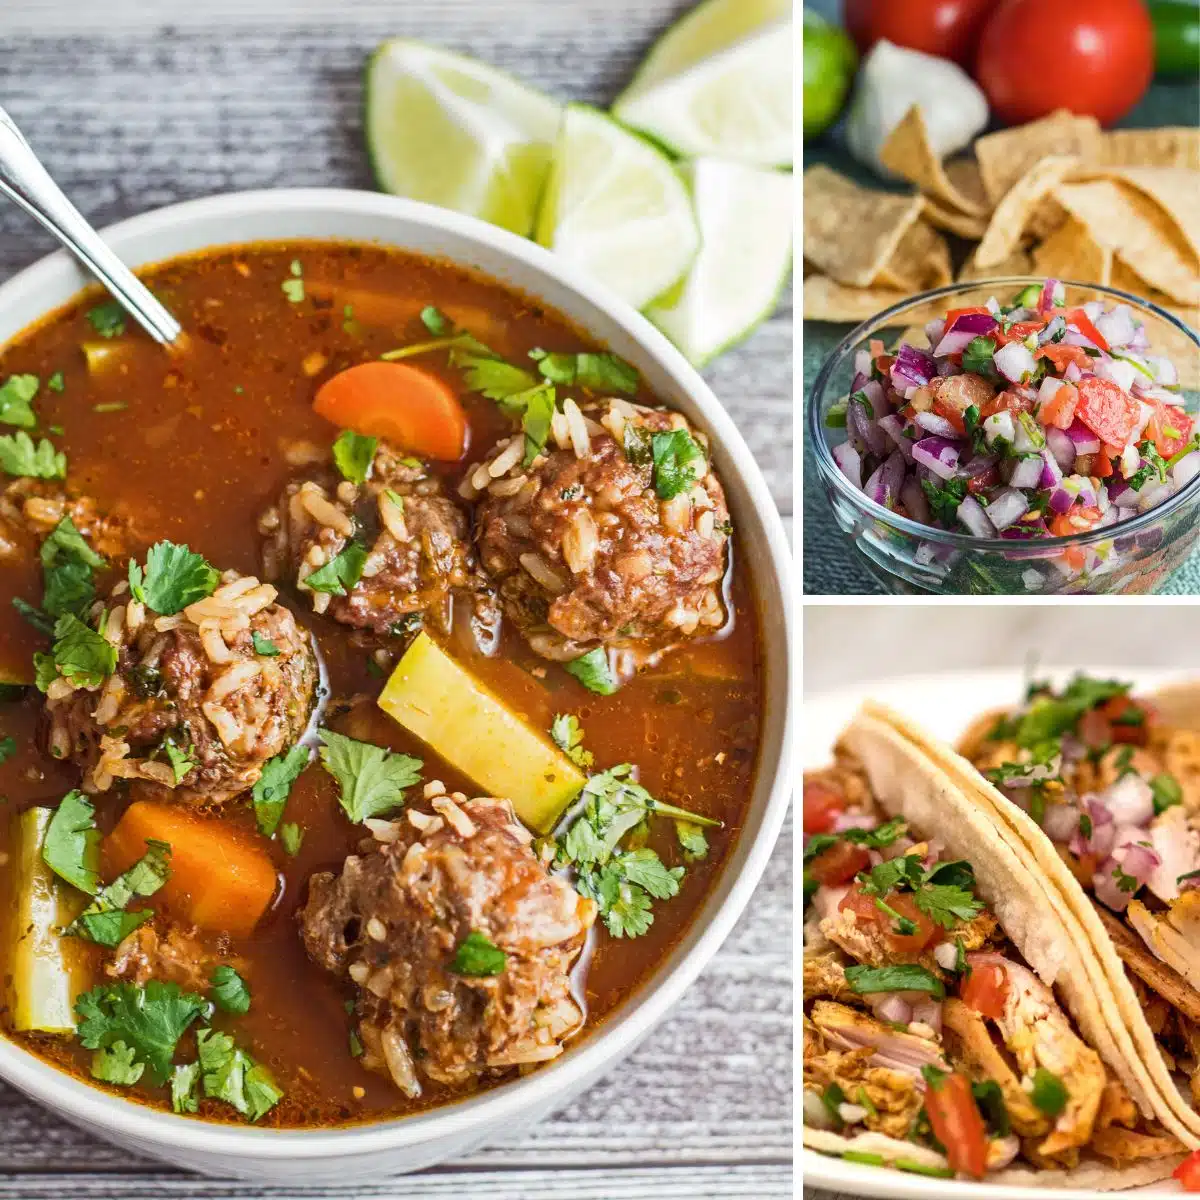 Best Mexican recipes collection of authentic and traditional recipes like these albondigas, pico de gallo, and turkey carnitas.